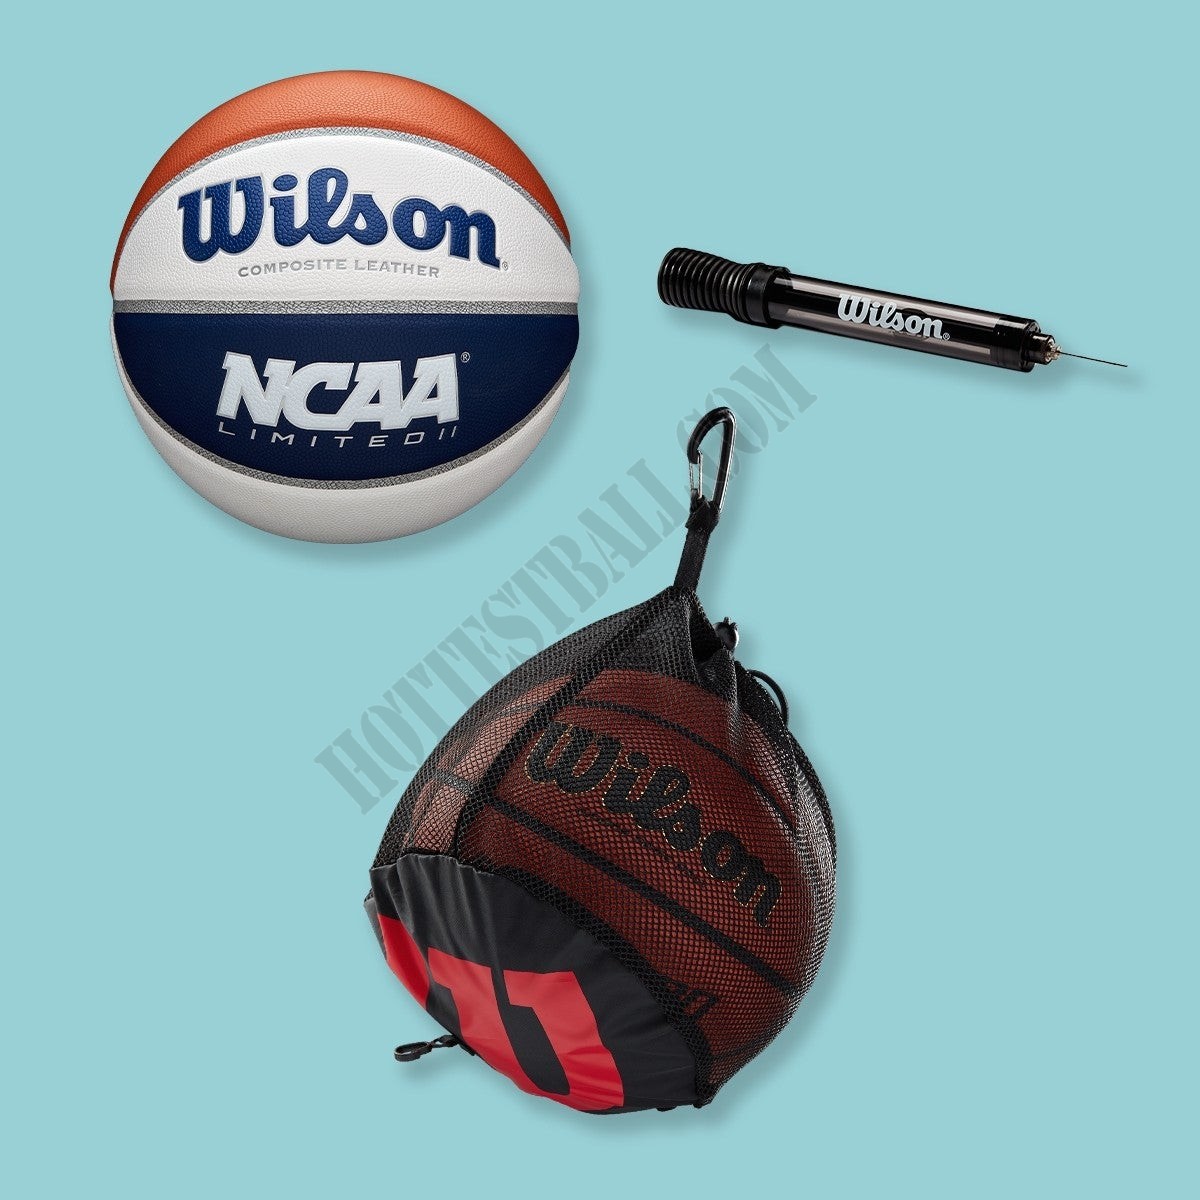 NCAA Limited Basketball Bundle - Wilson Discount Store - NCAA Limited Basketball Bundle - Wilson Discount Store